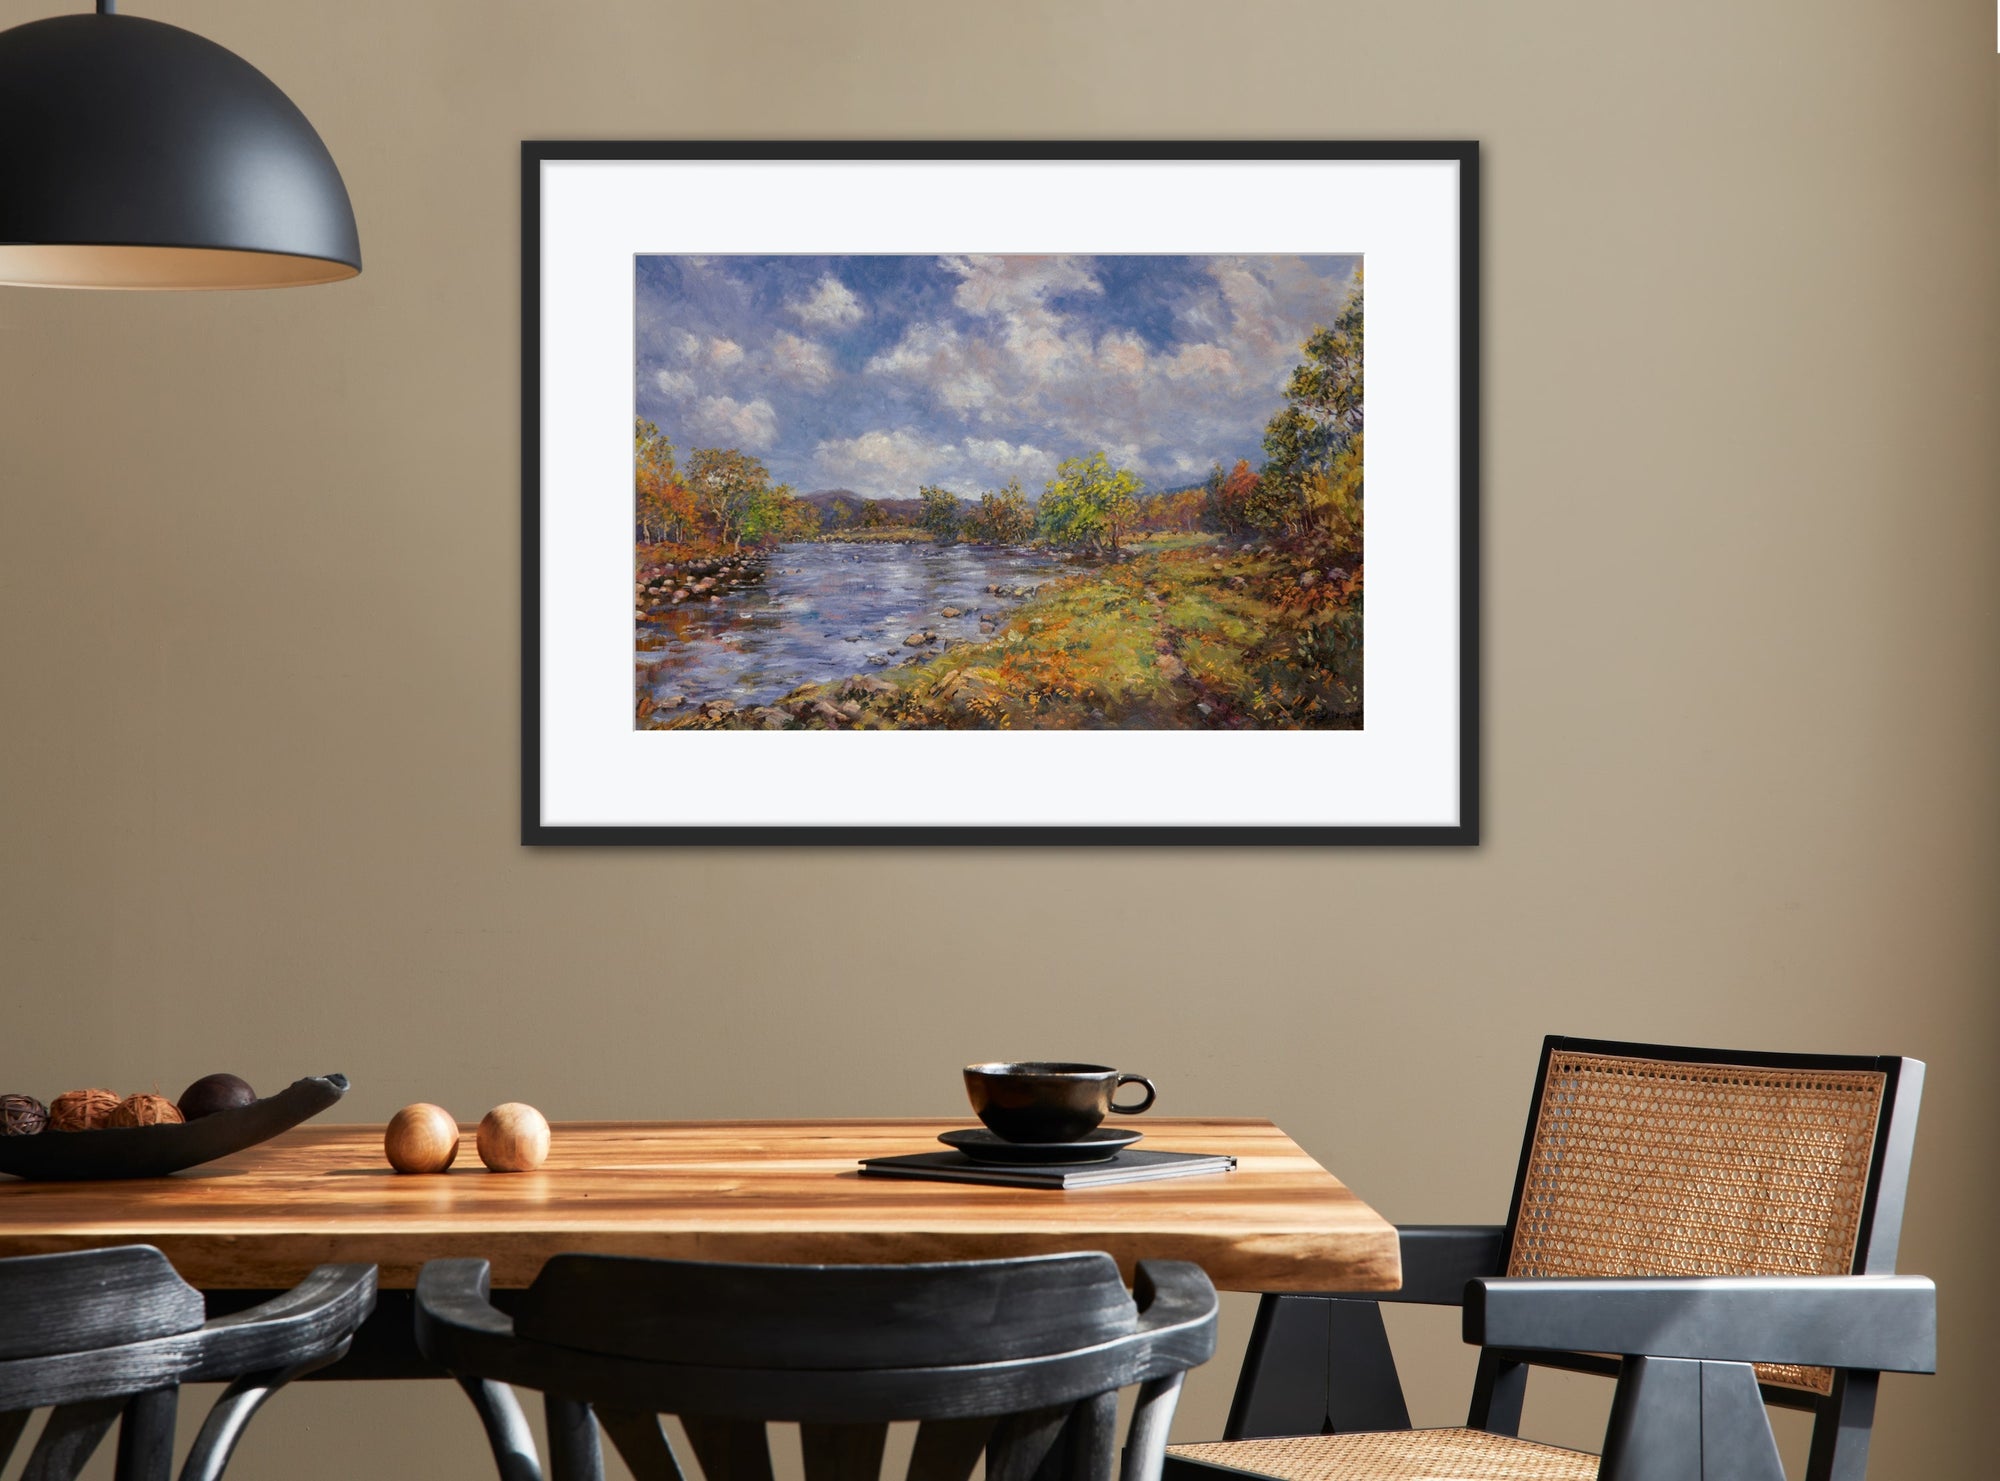 'Oh, such a perfect day!' - Fine Art Print of Deeside